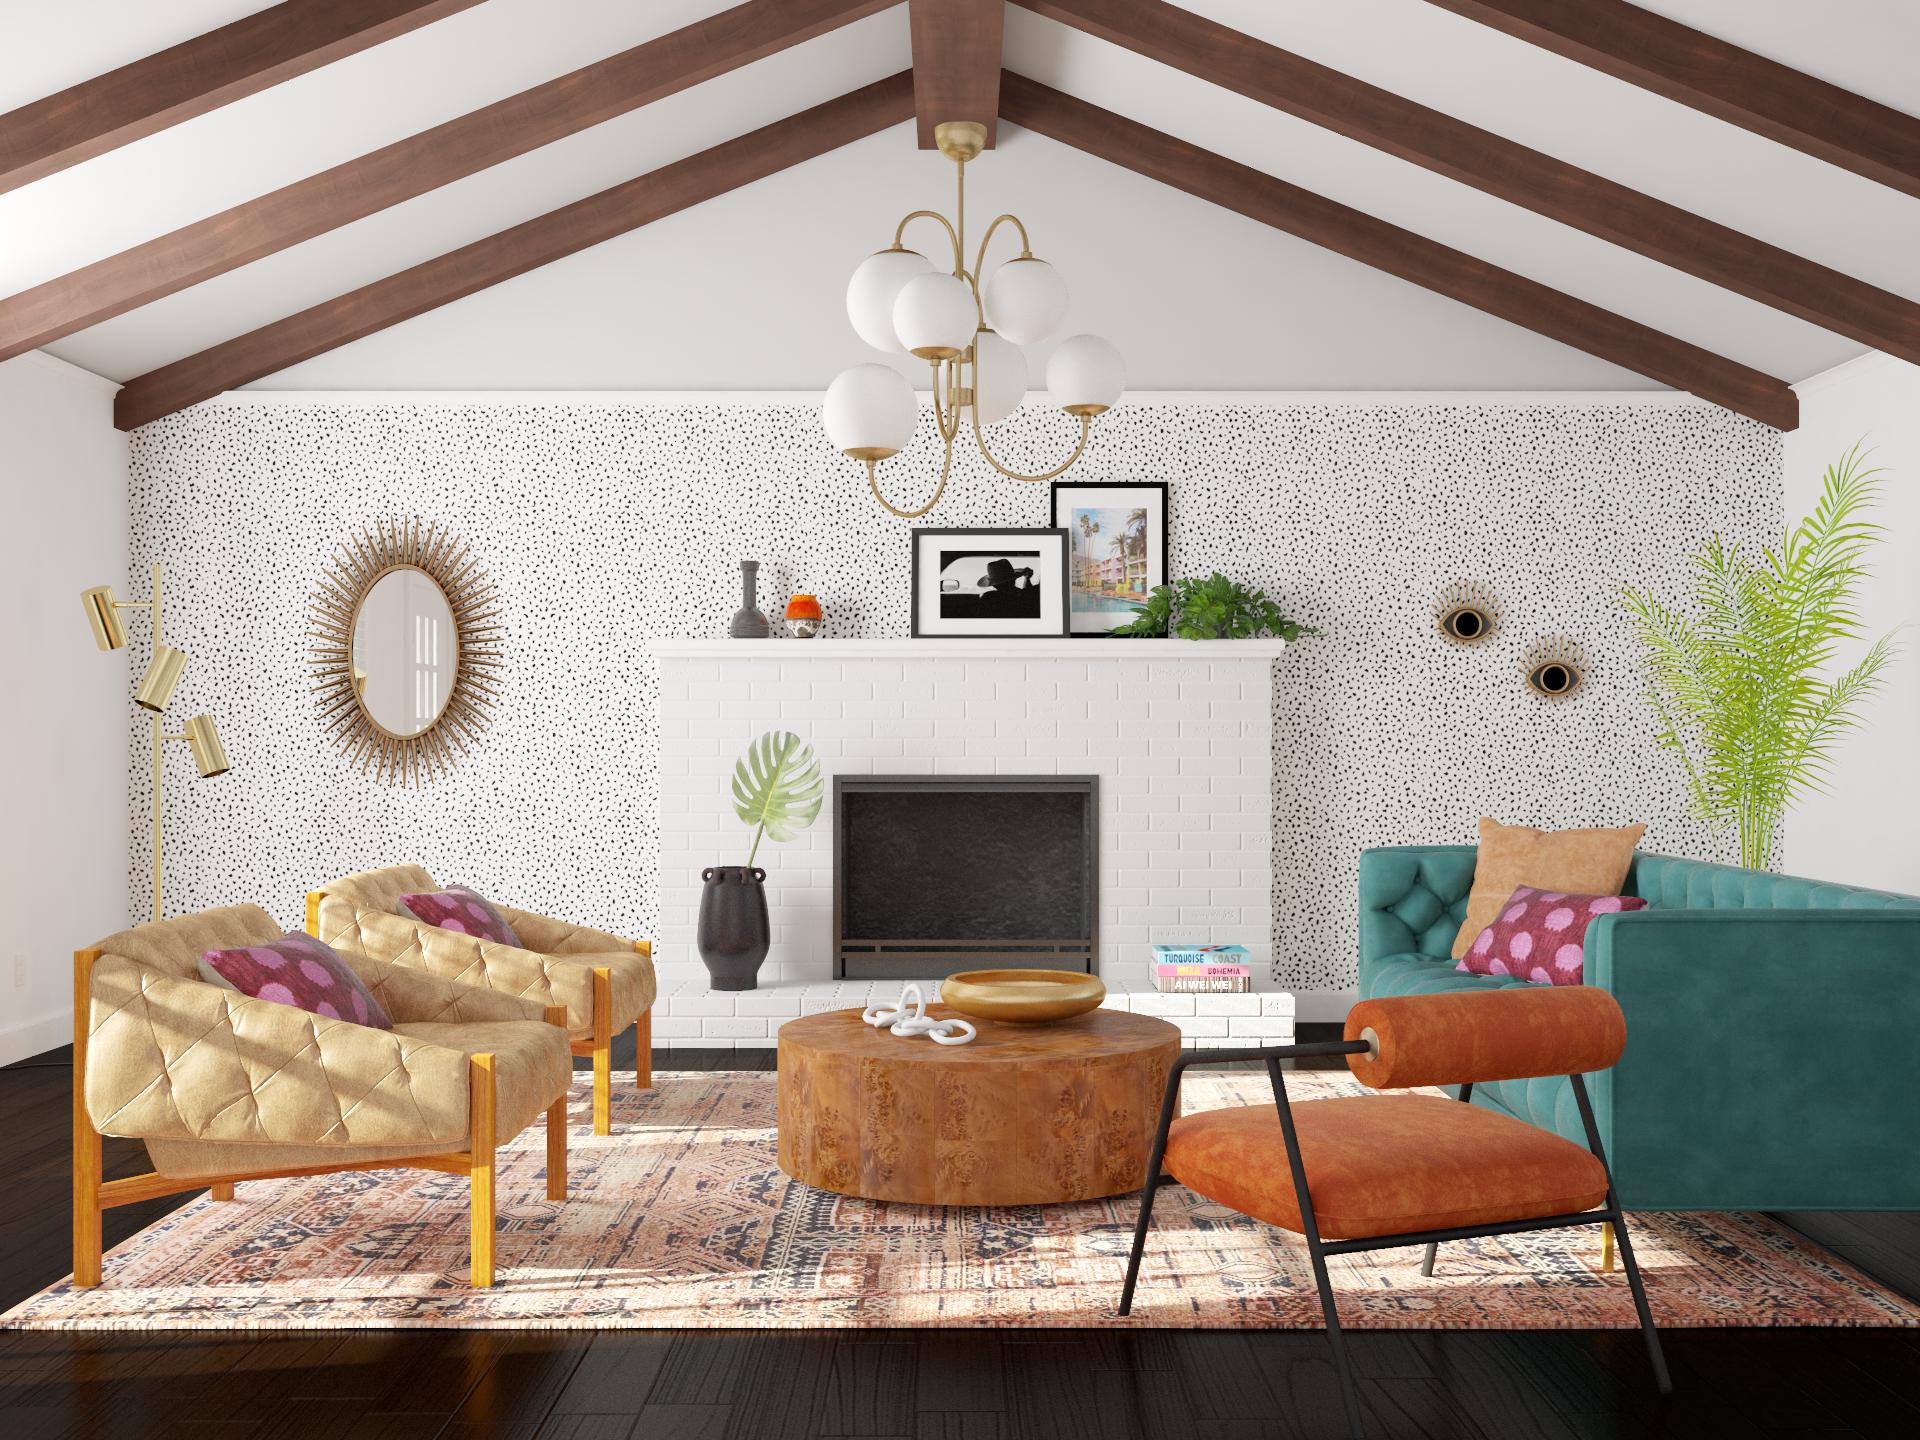 How about Boho? A cozy living room in the attic